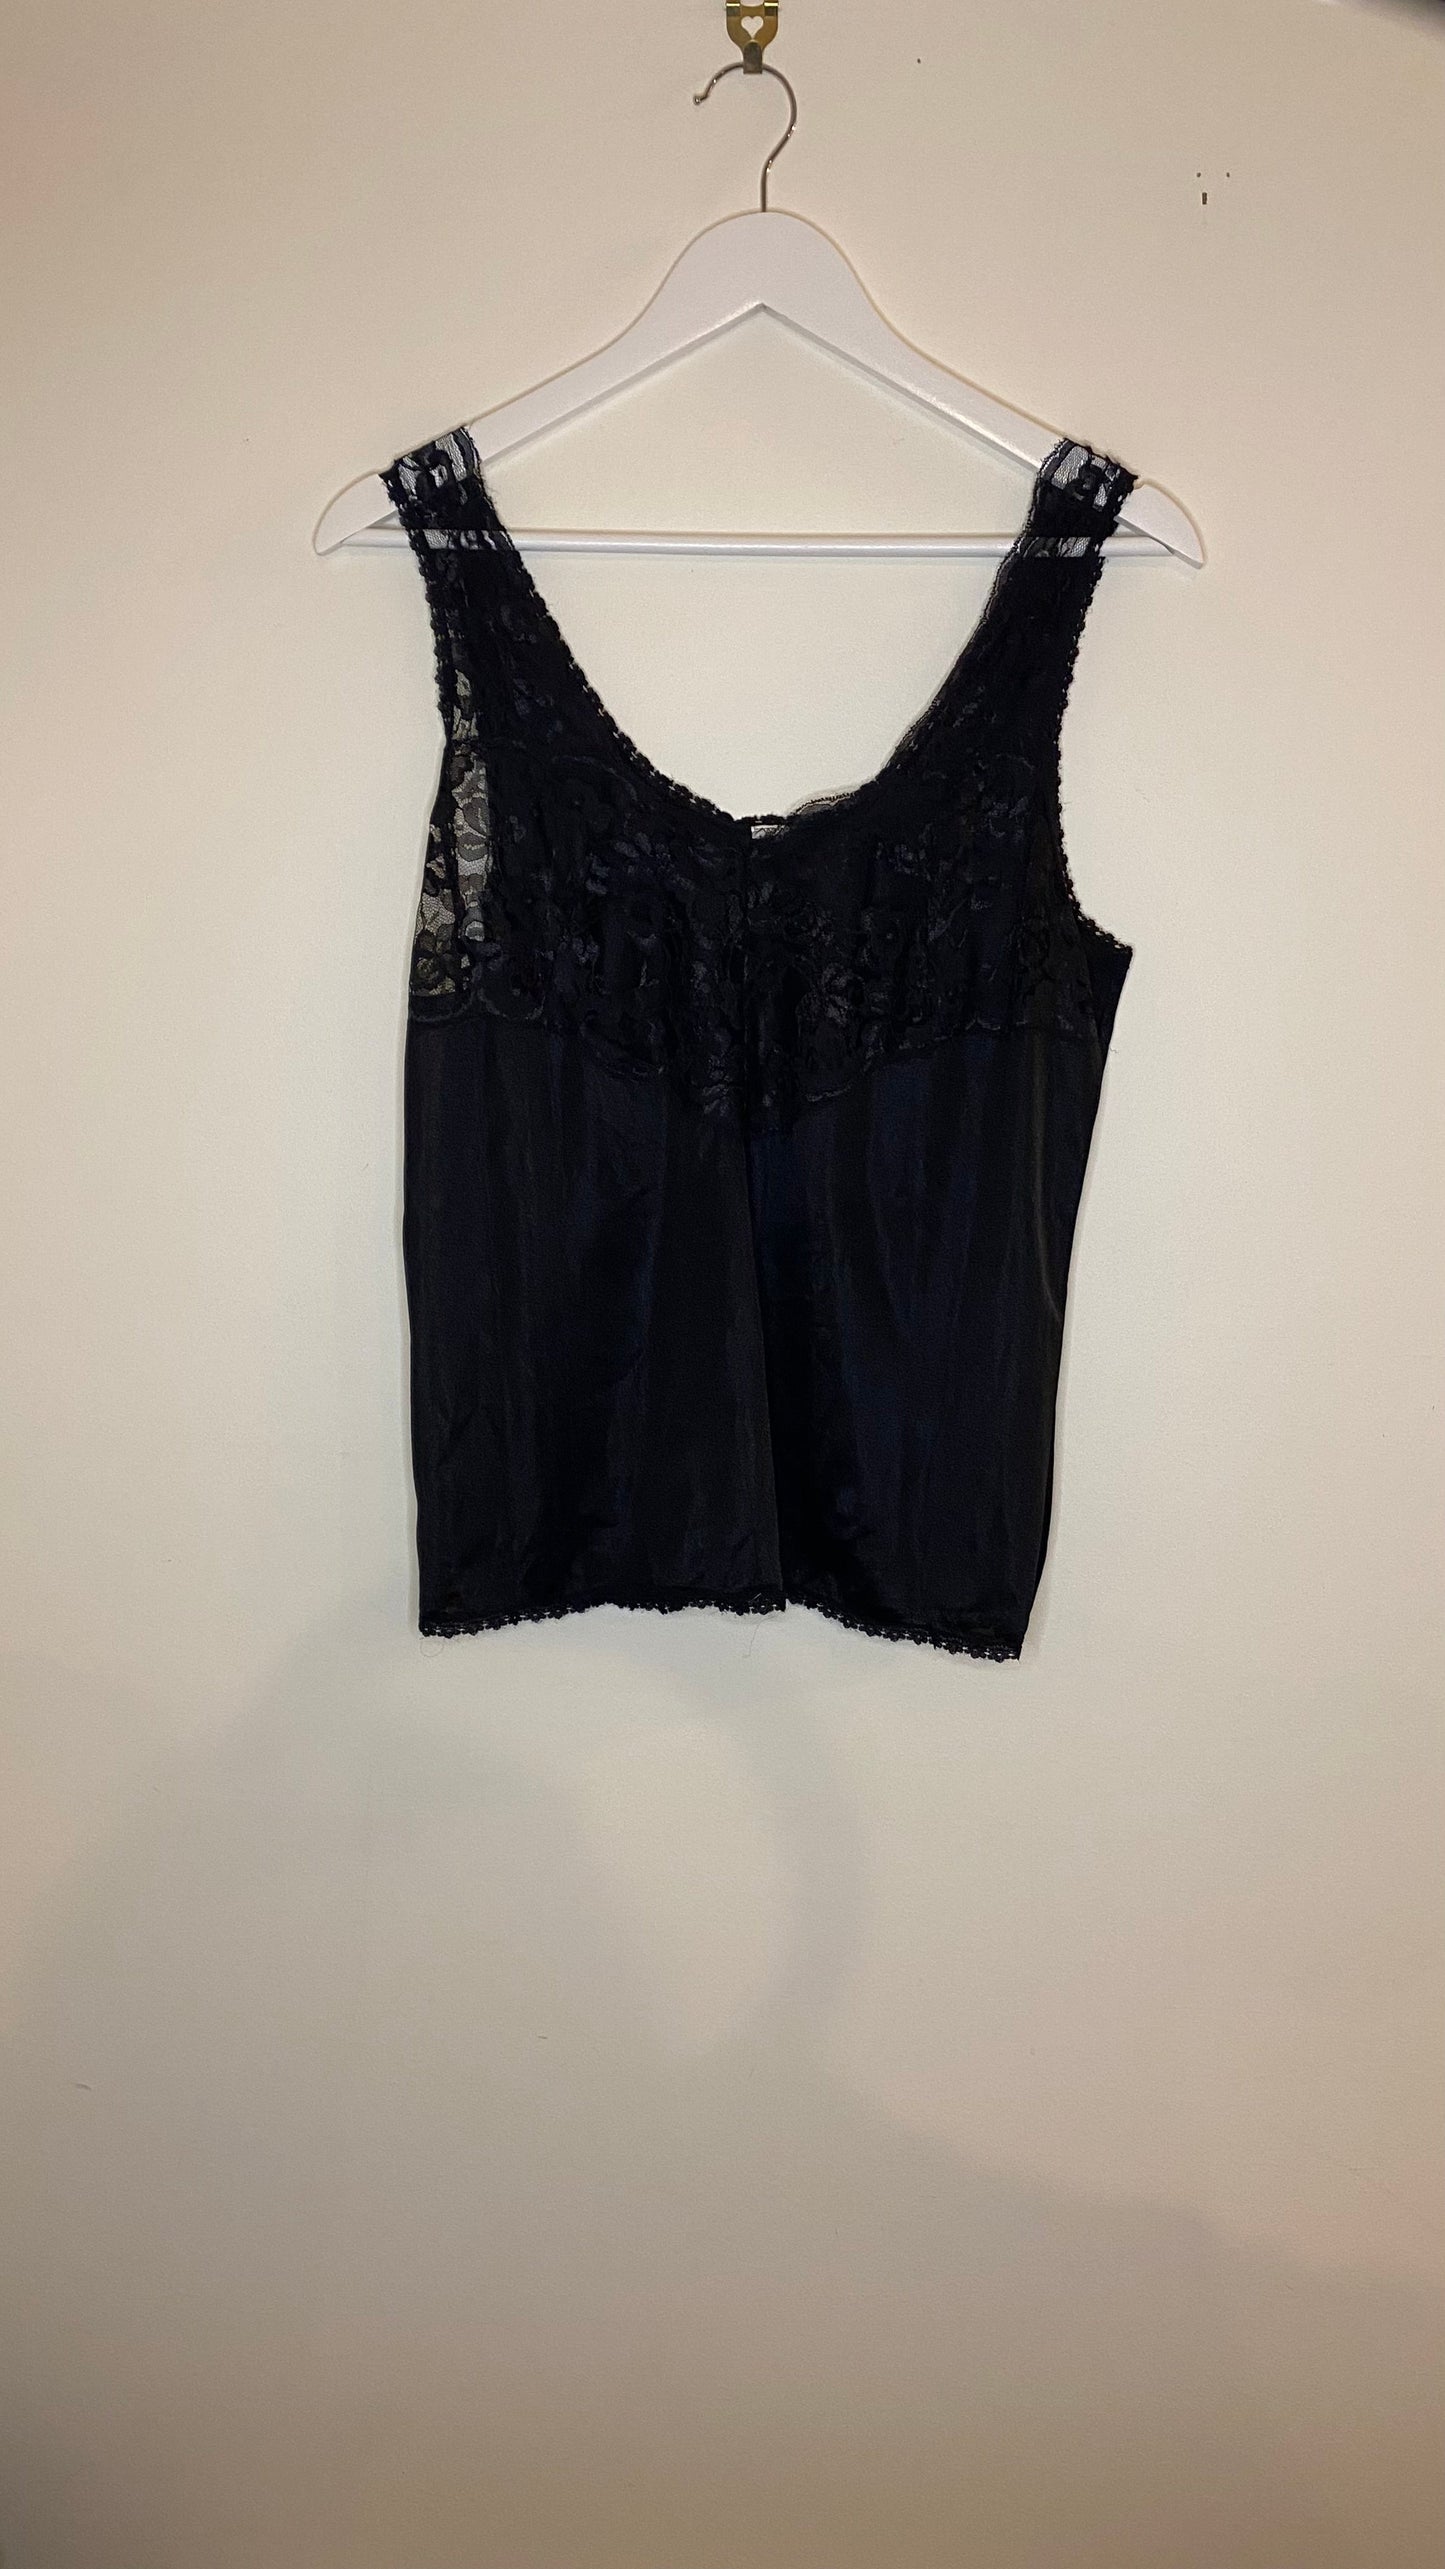 Black Lace Cami - Getting Thrifty